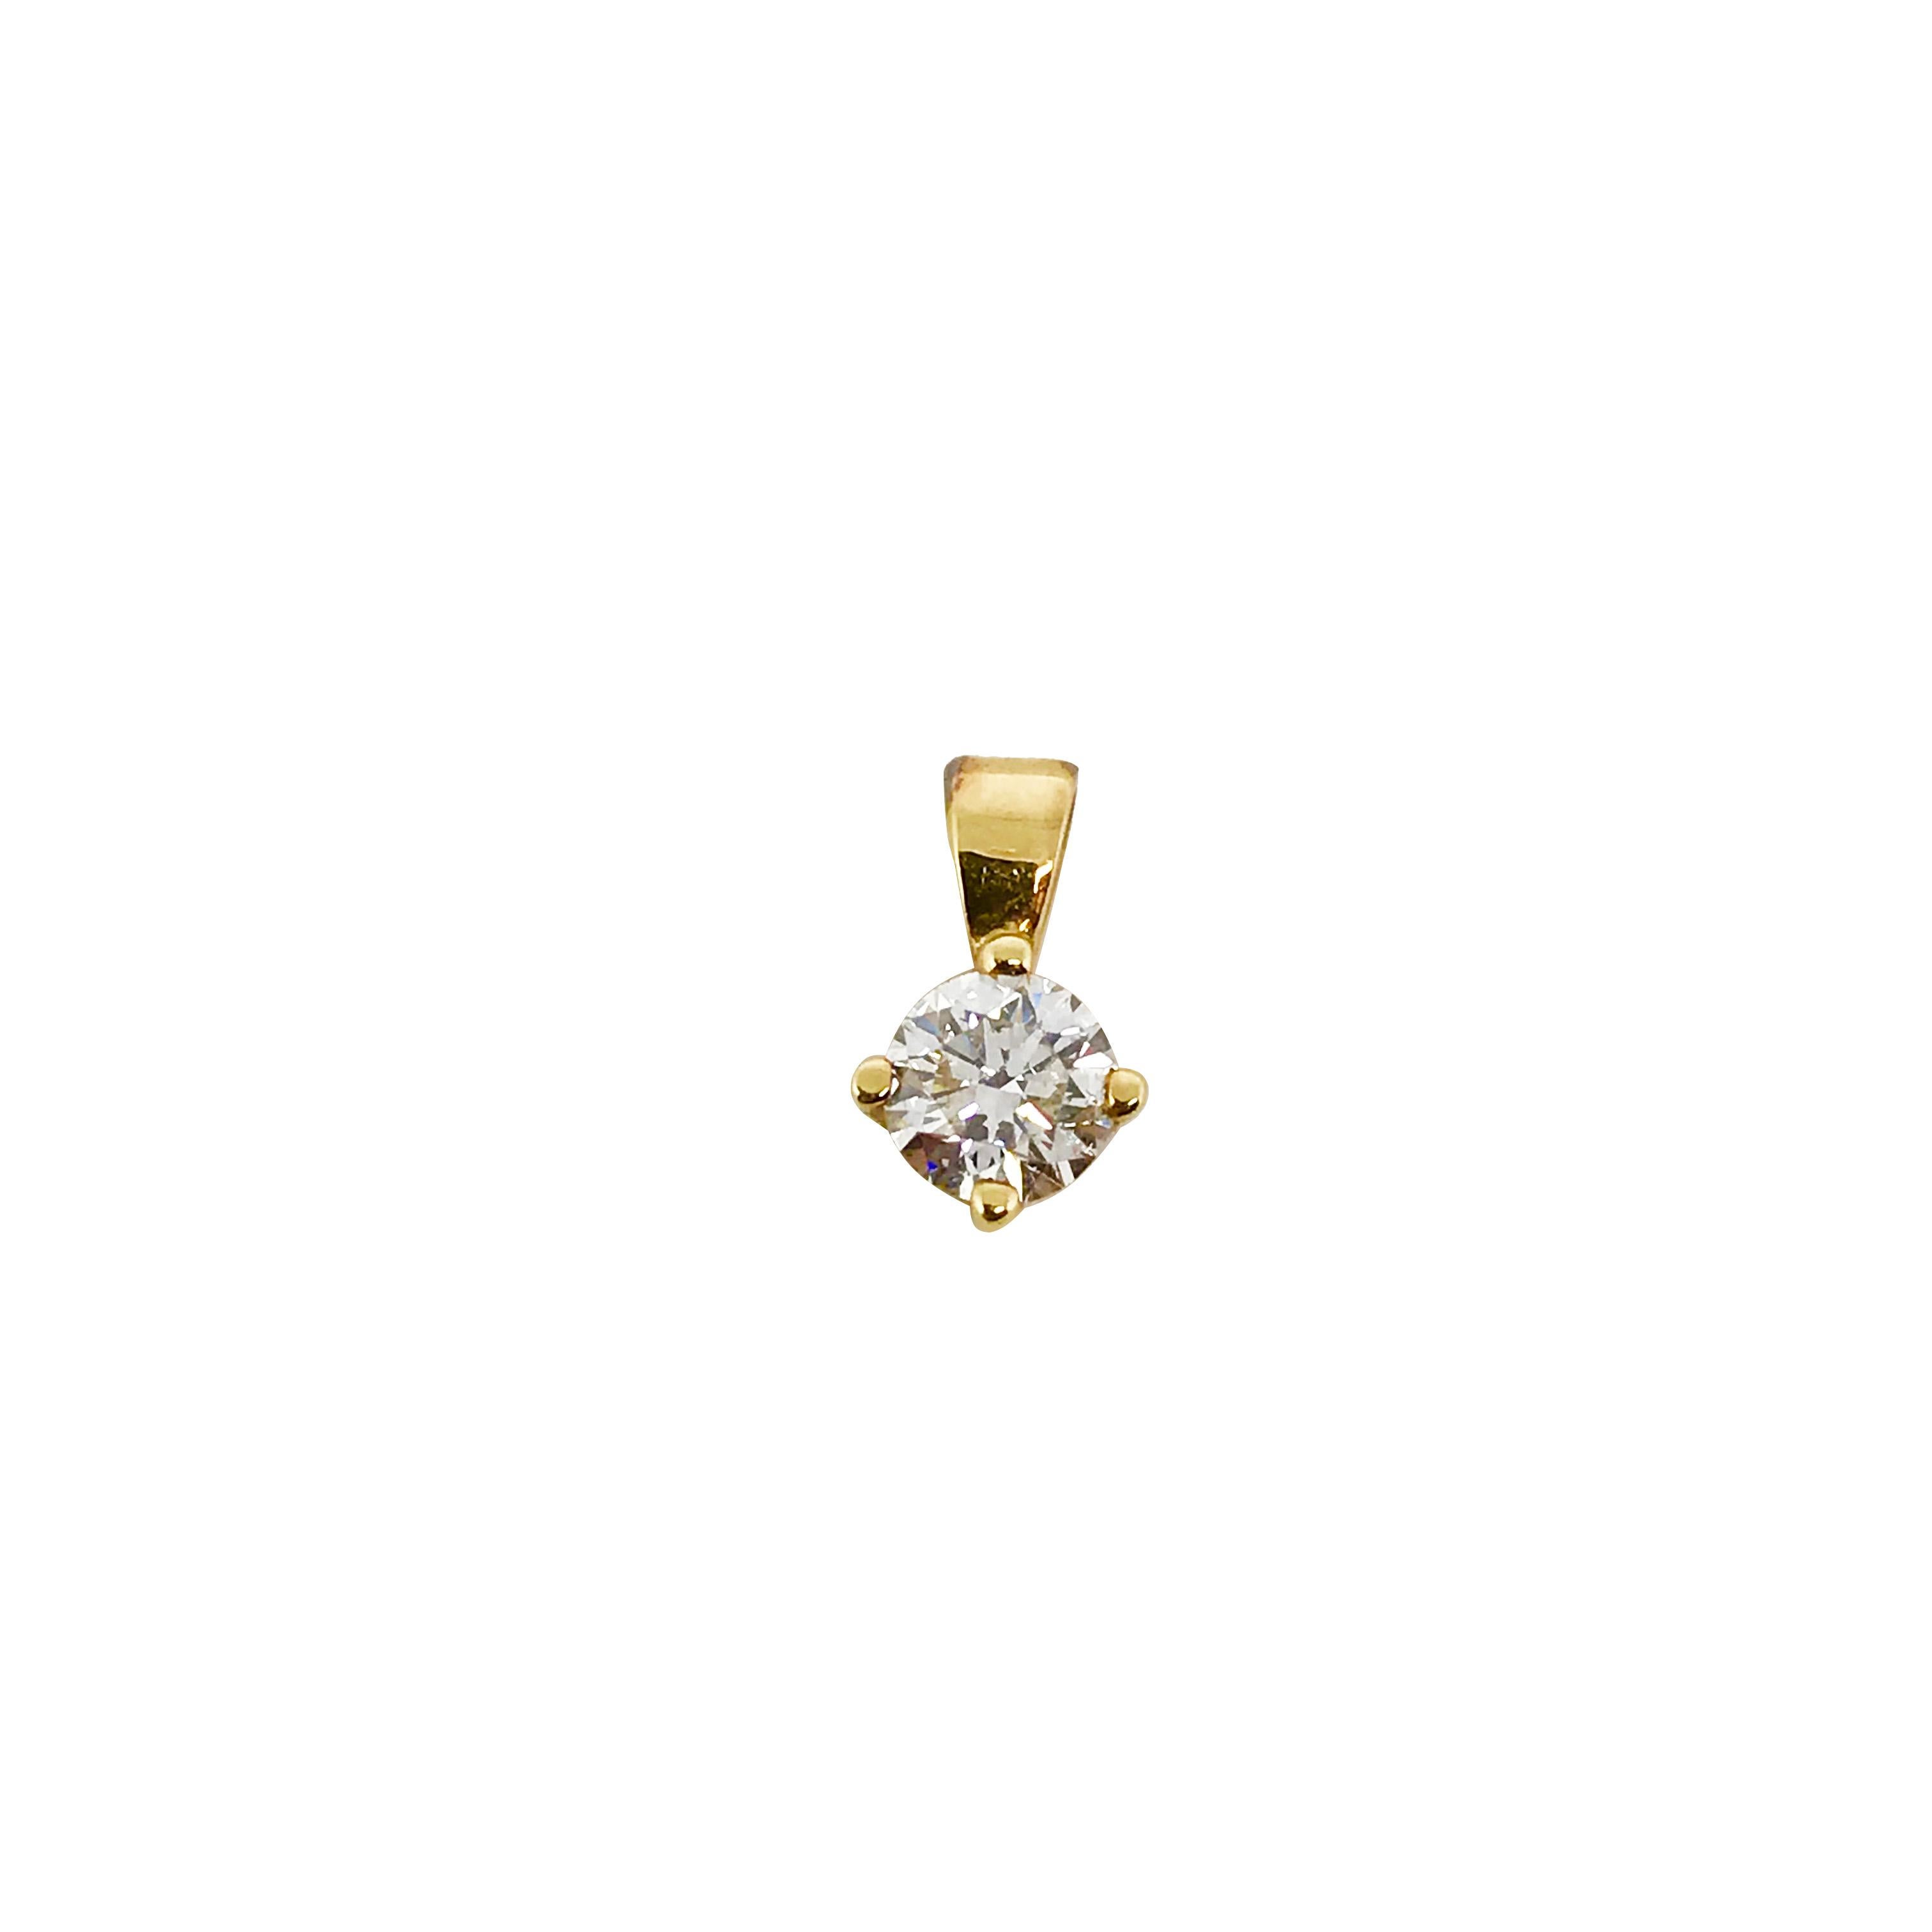 A beautiful solitaire pendant with a dazzling 0.5 carat round brilliant diamond. The jewelry is made of 18k Yellow Gold with a high quality polish. It comes with IGI certificate and a fancy jewelry box.

1 diamond main stone of 0.5 carat
cut: round